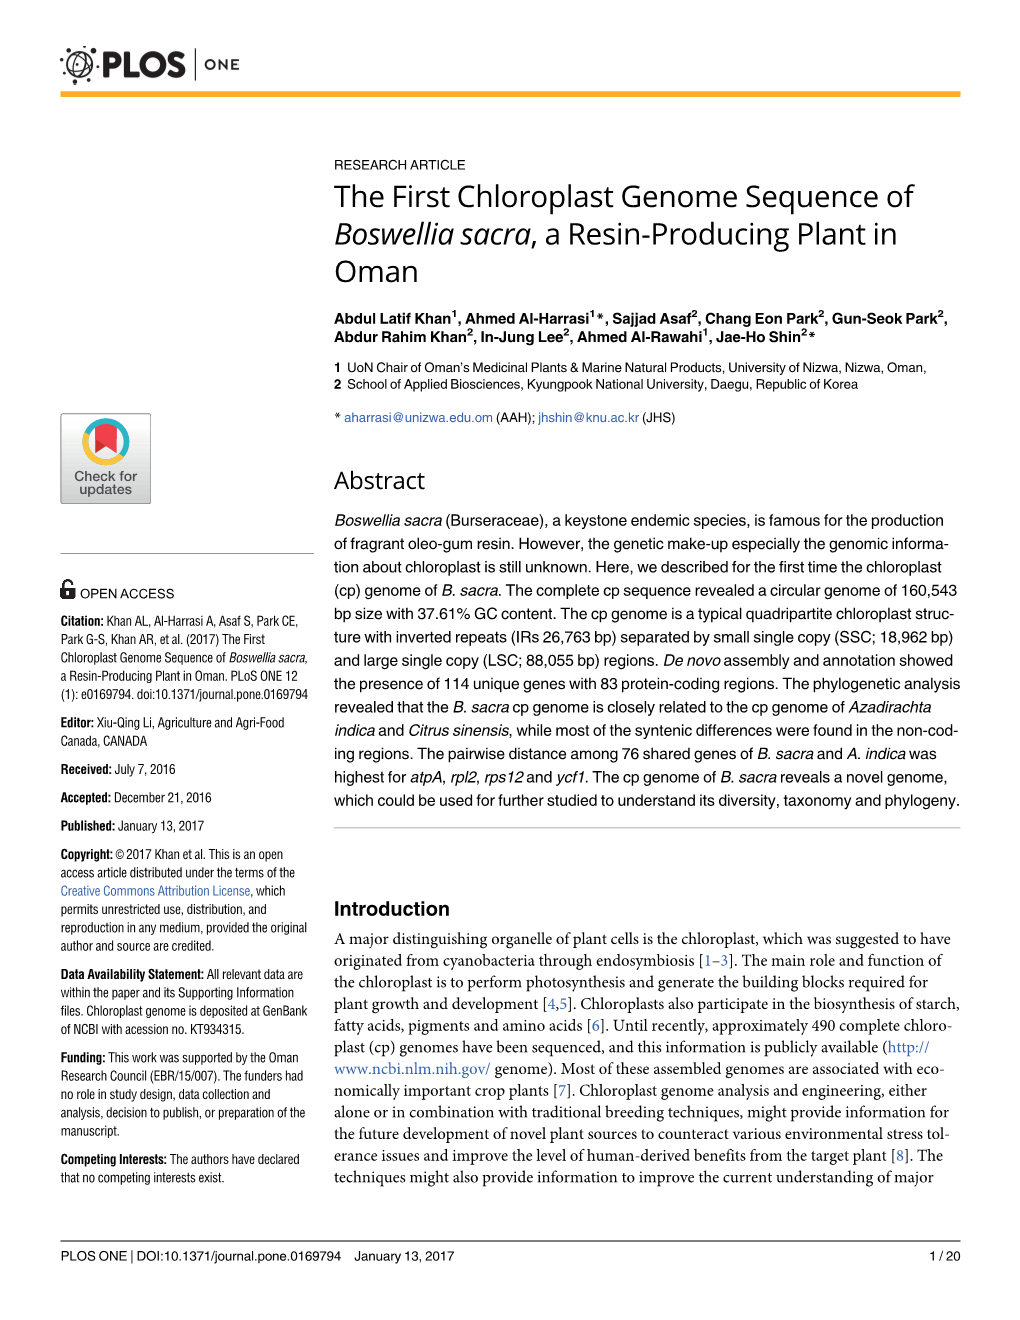 The First Chloroplast Genome Sequence of Boswellia Sacra, a Resin-Producing Plant in Oman